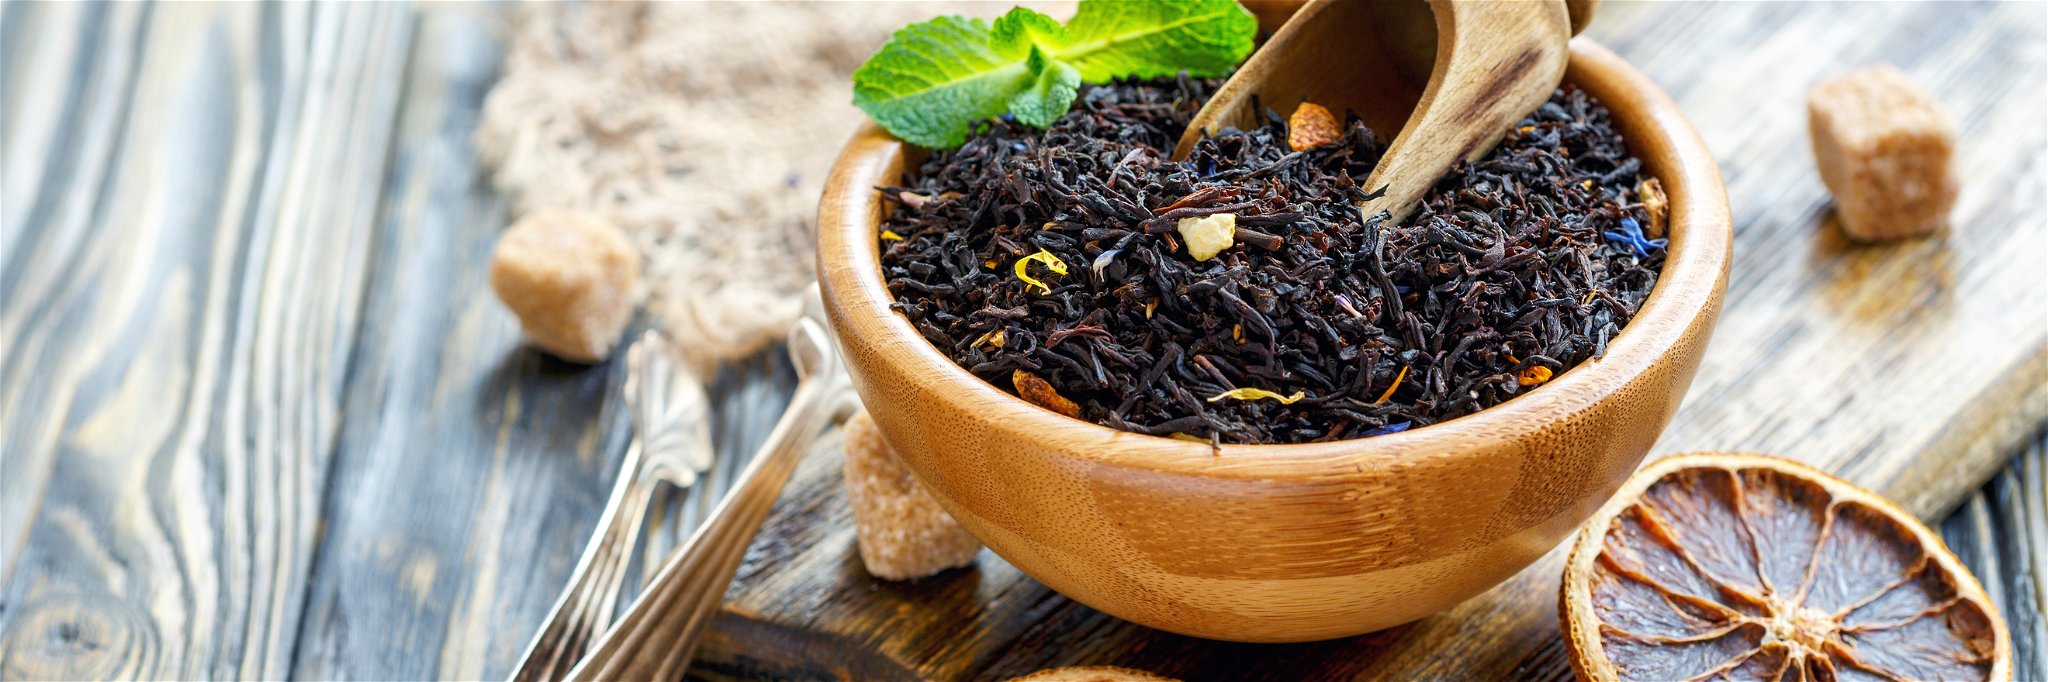 Earl Grey is made from black tea and&nbsp;bergamot&nbsp;citrus extract.